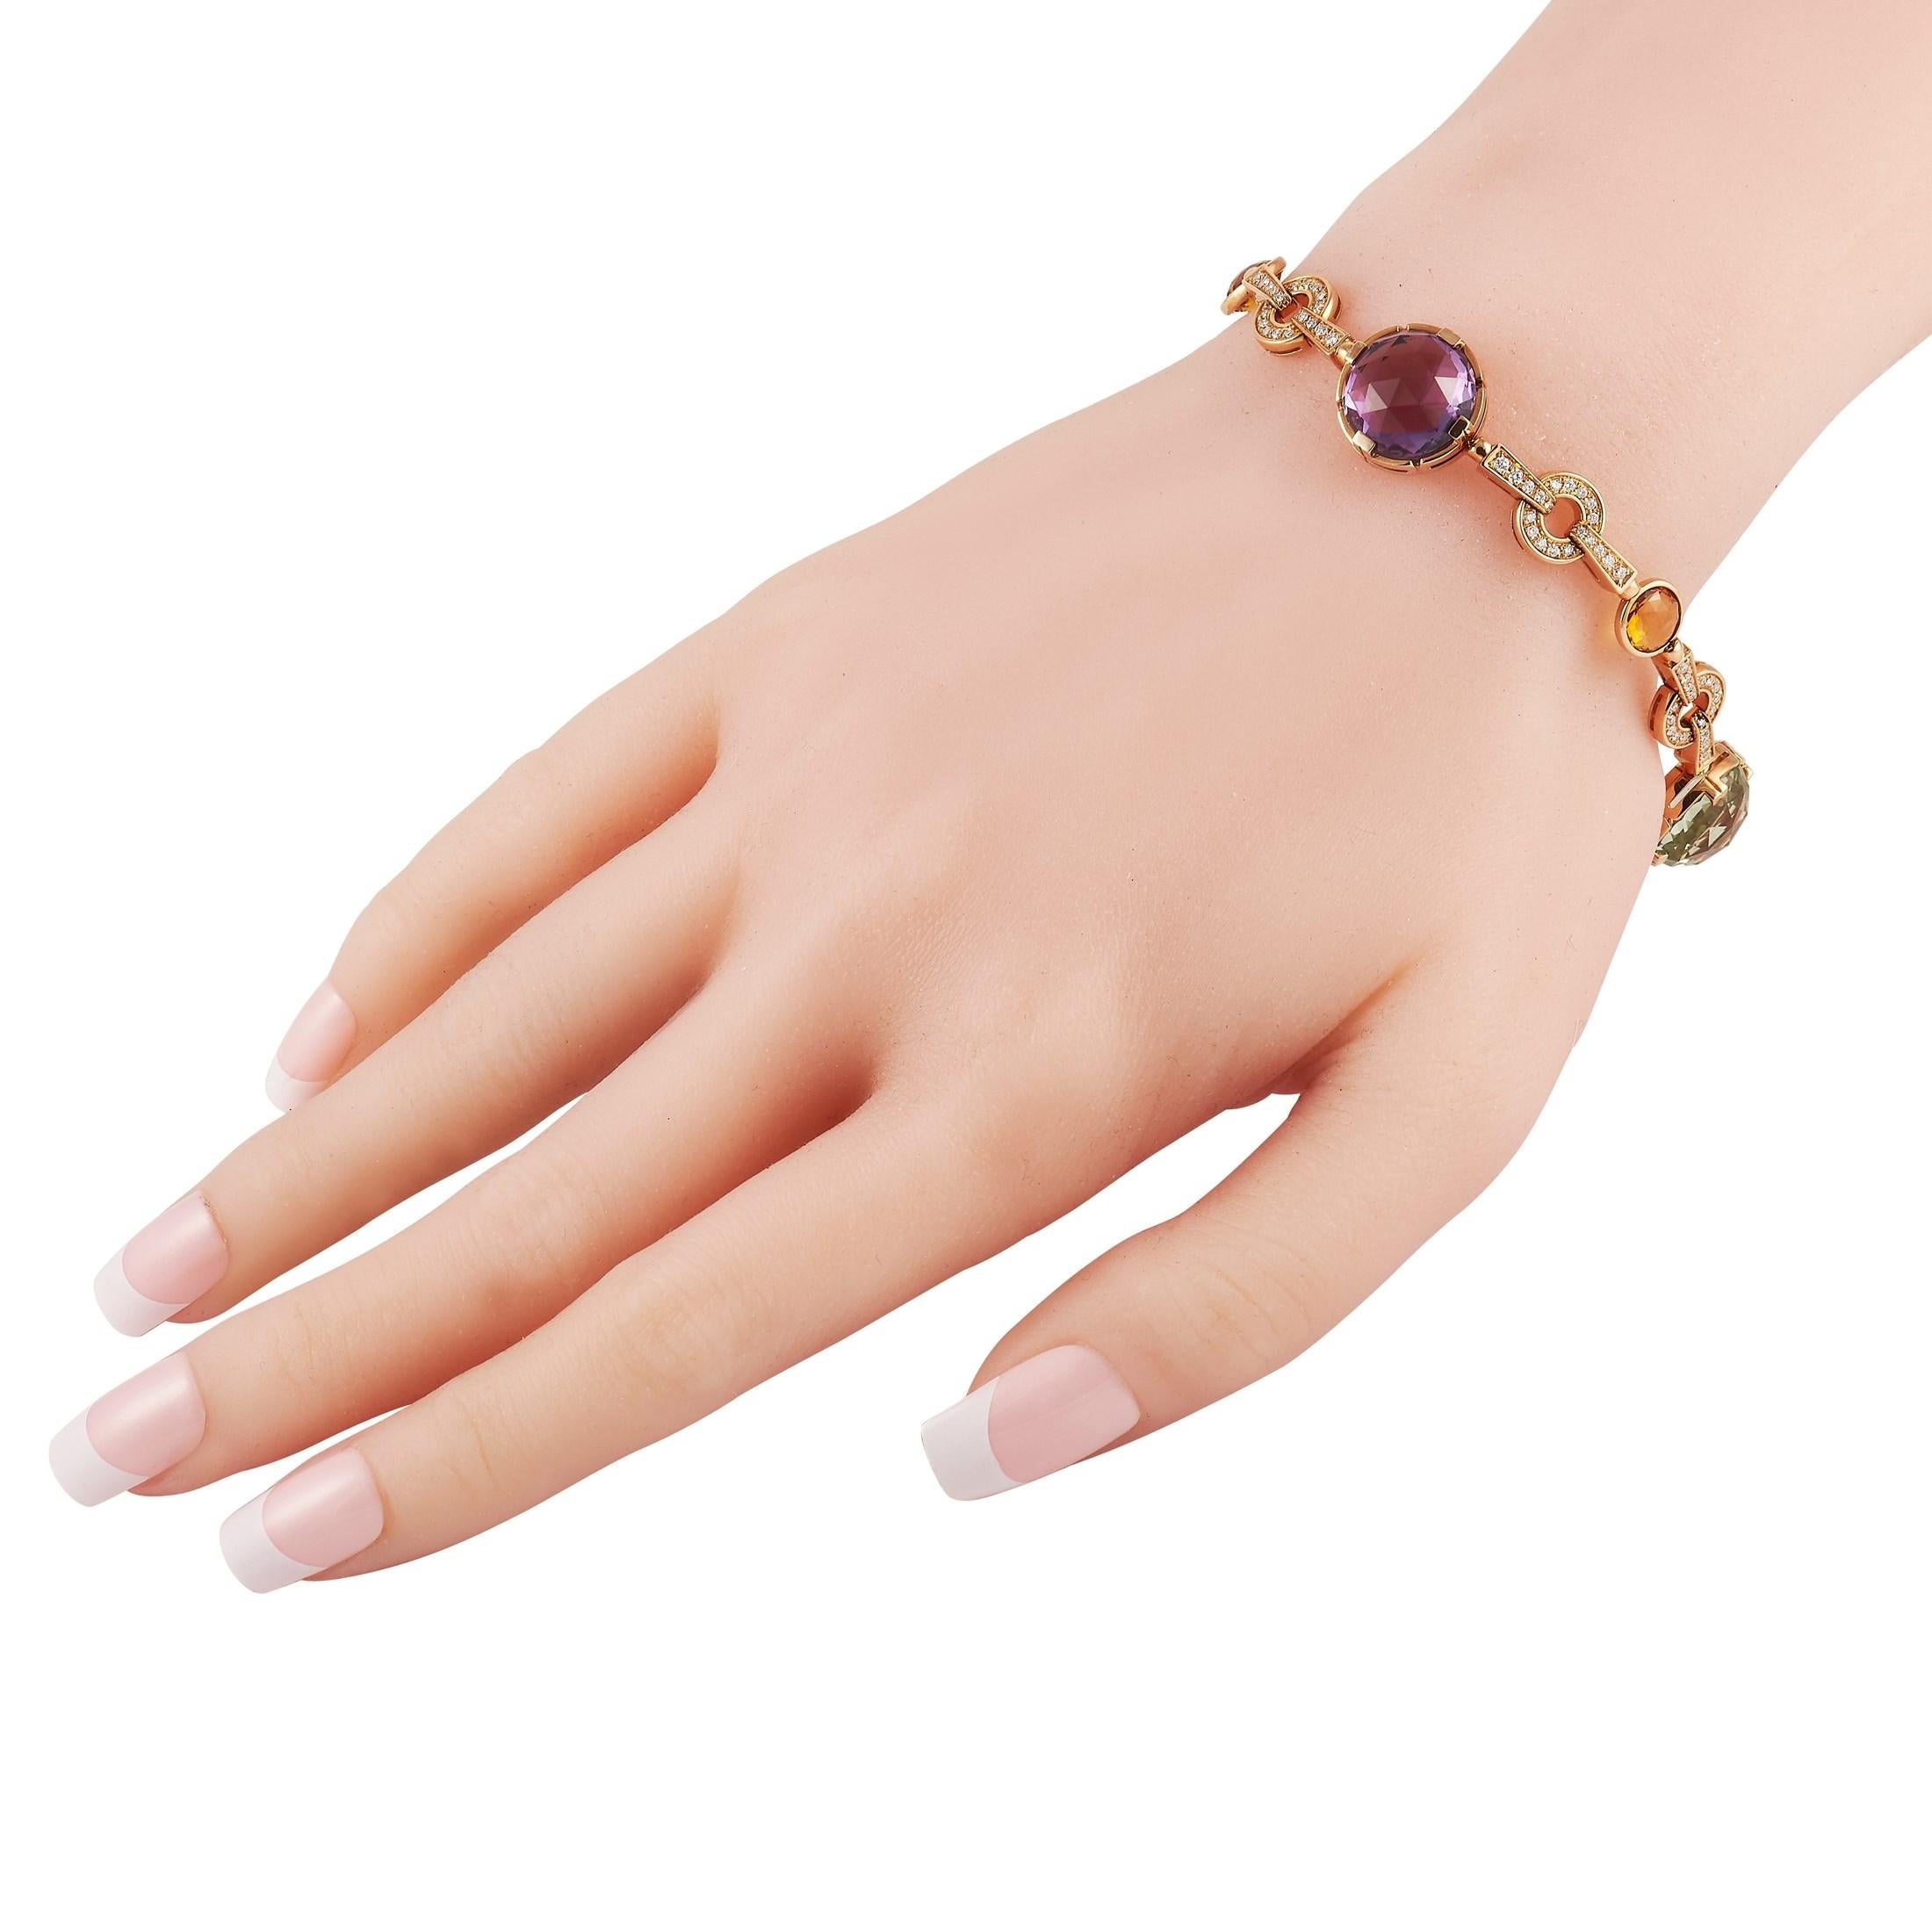 This Bvlgari Parentesi bracelet will add a stylish pop of color to any outfit. Diamonds with a total weight of 0.90 carats elevate the 18K rose gold setting, which measures 8” long. Bold amethyst and citrine accents provide an elegant finishing